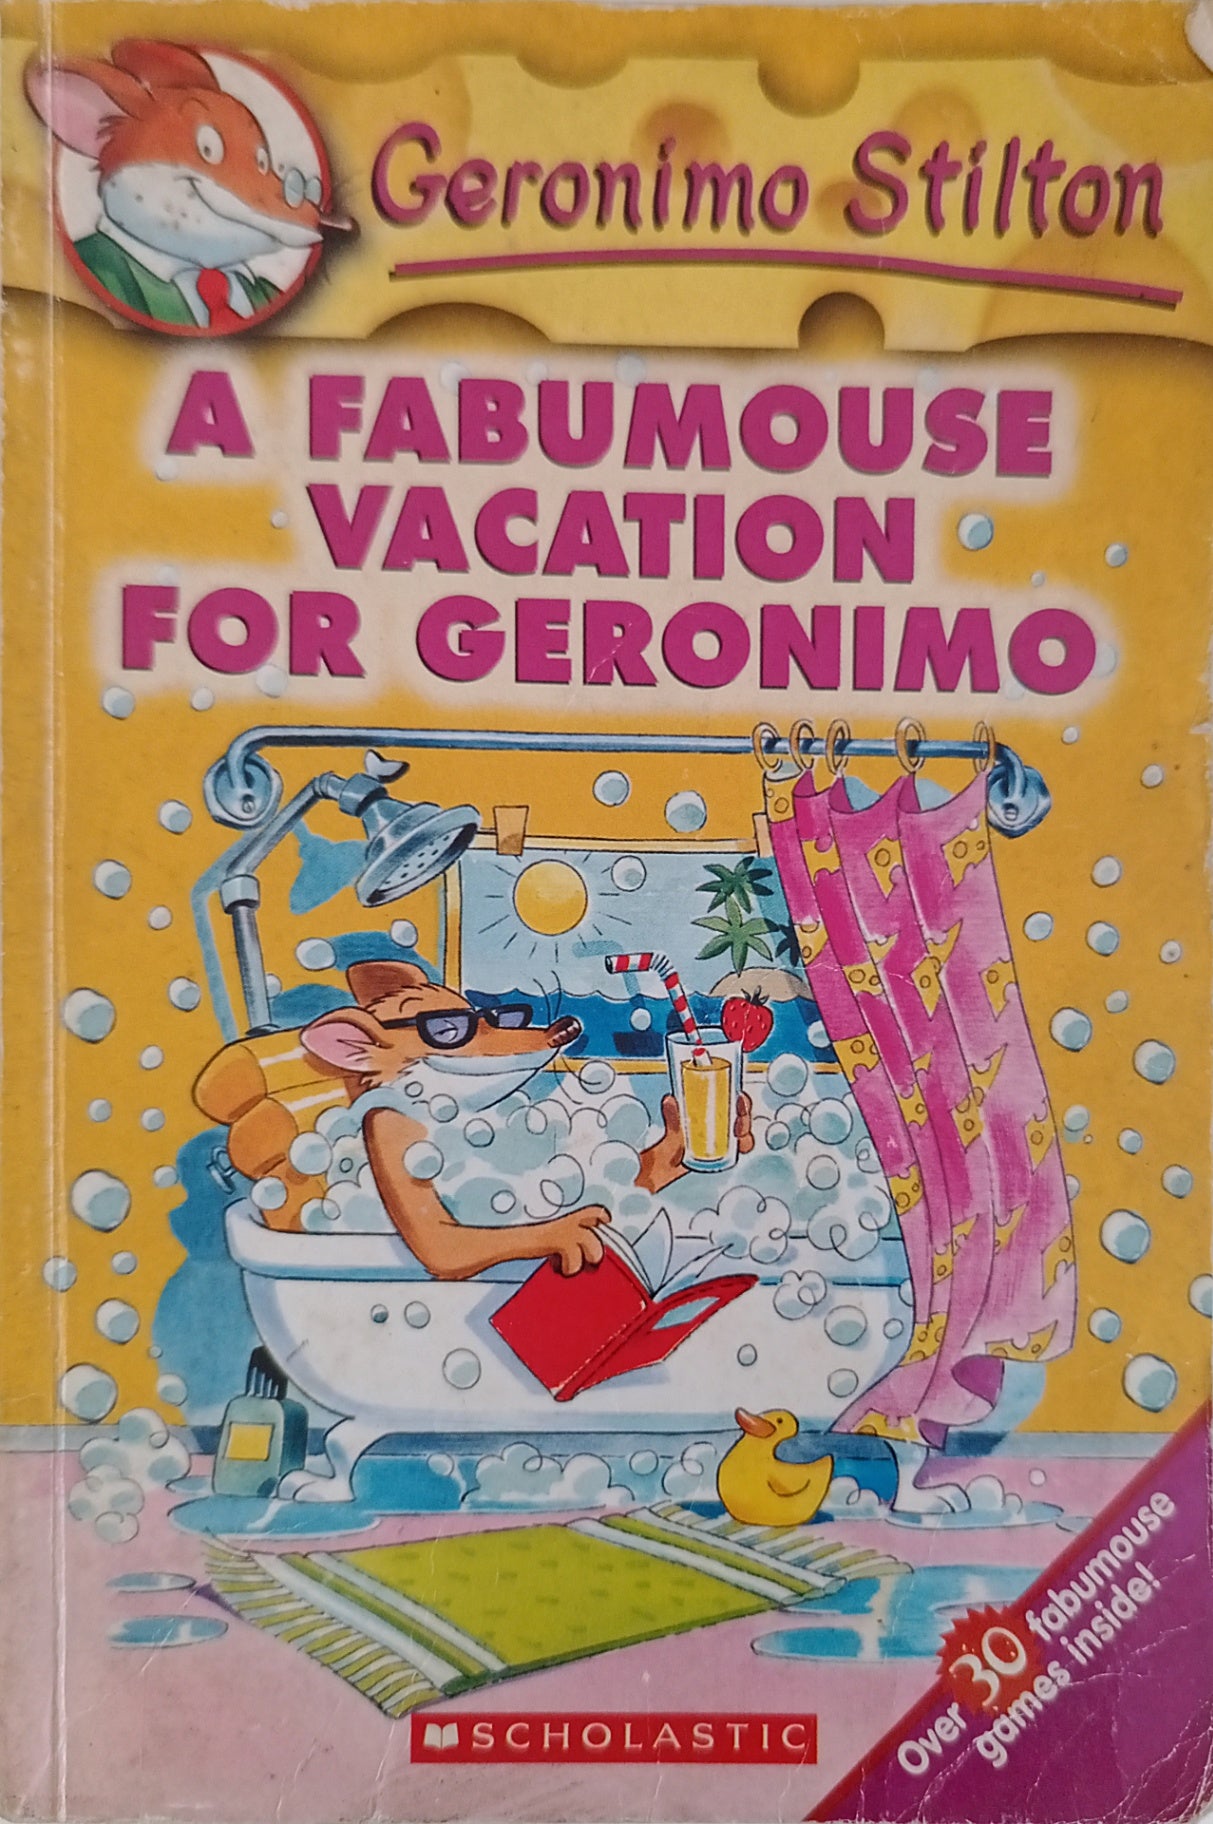 A Fabmouse Vacation for Geronimo